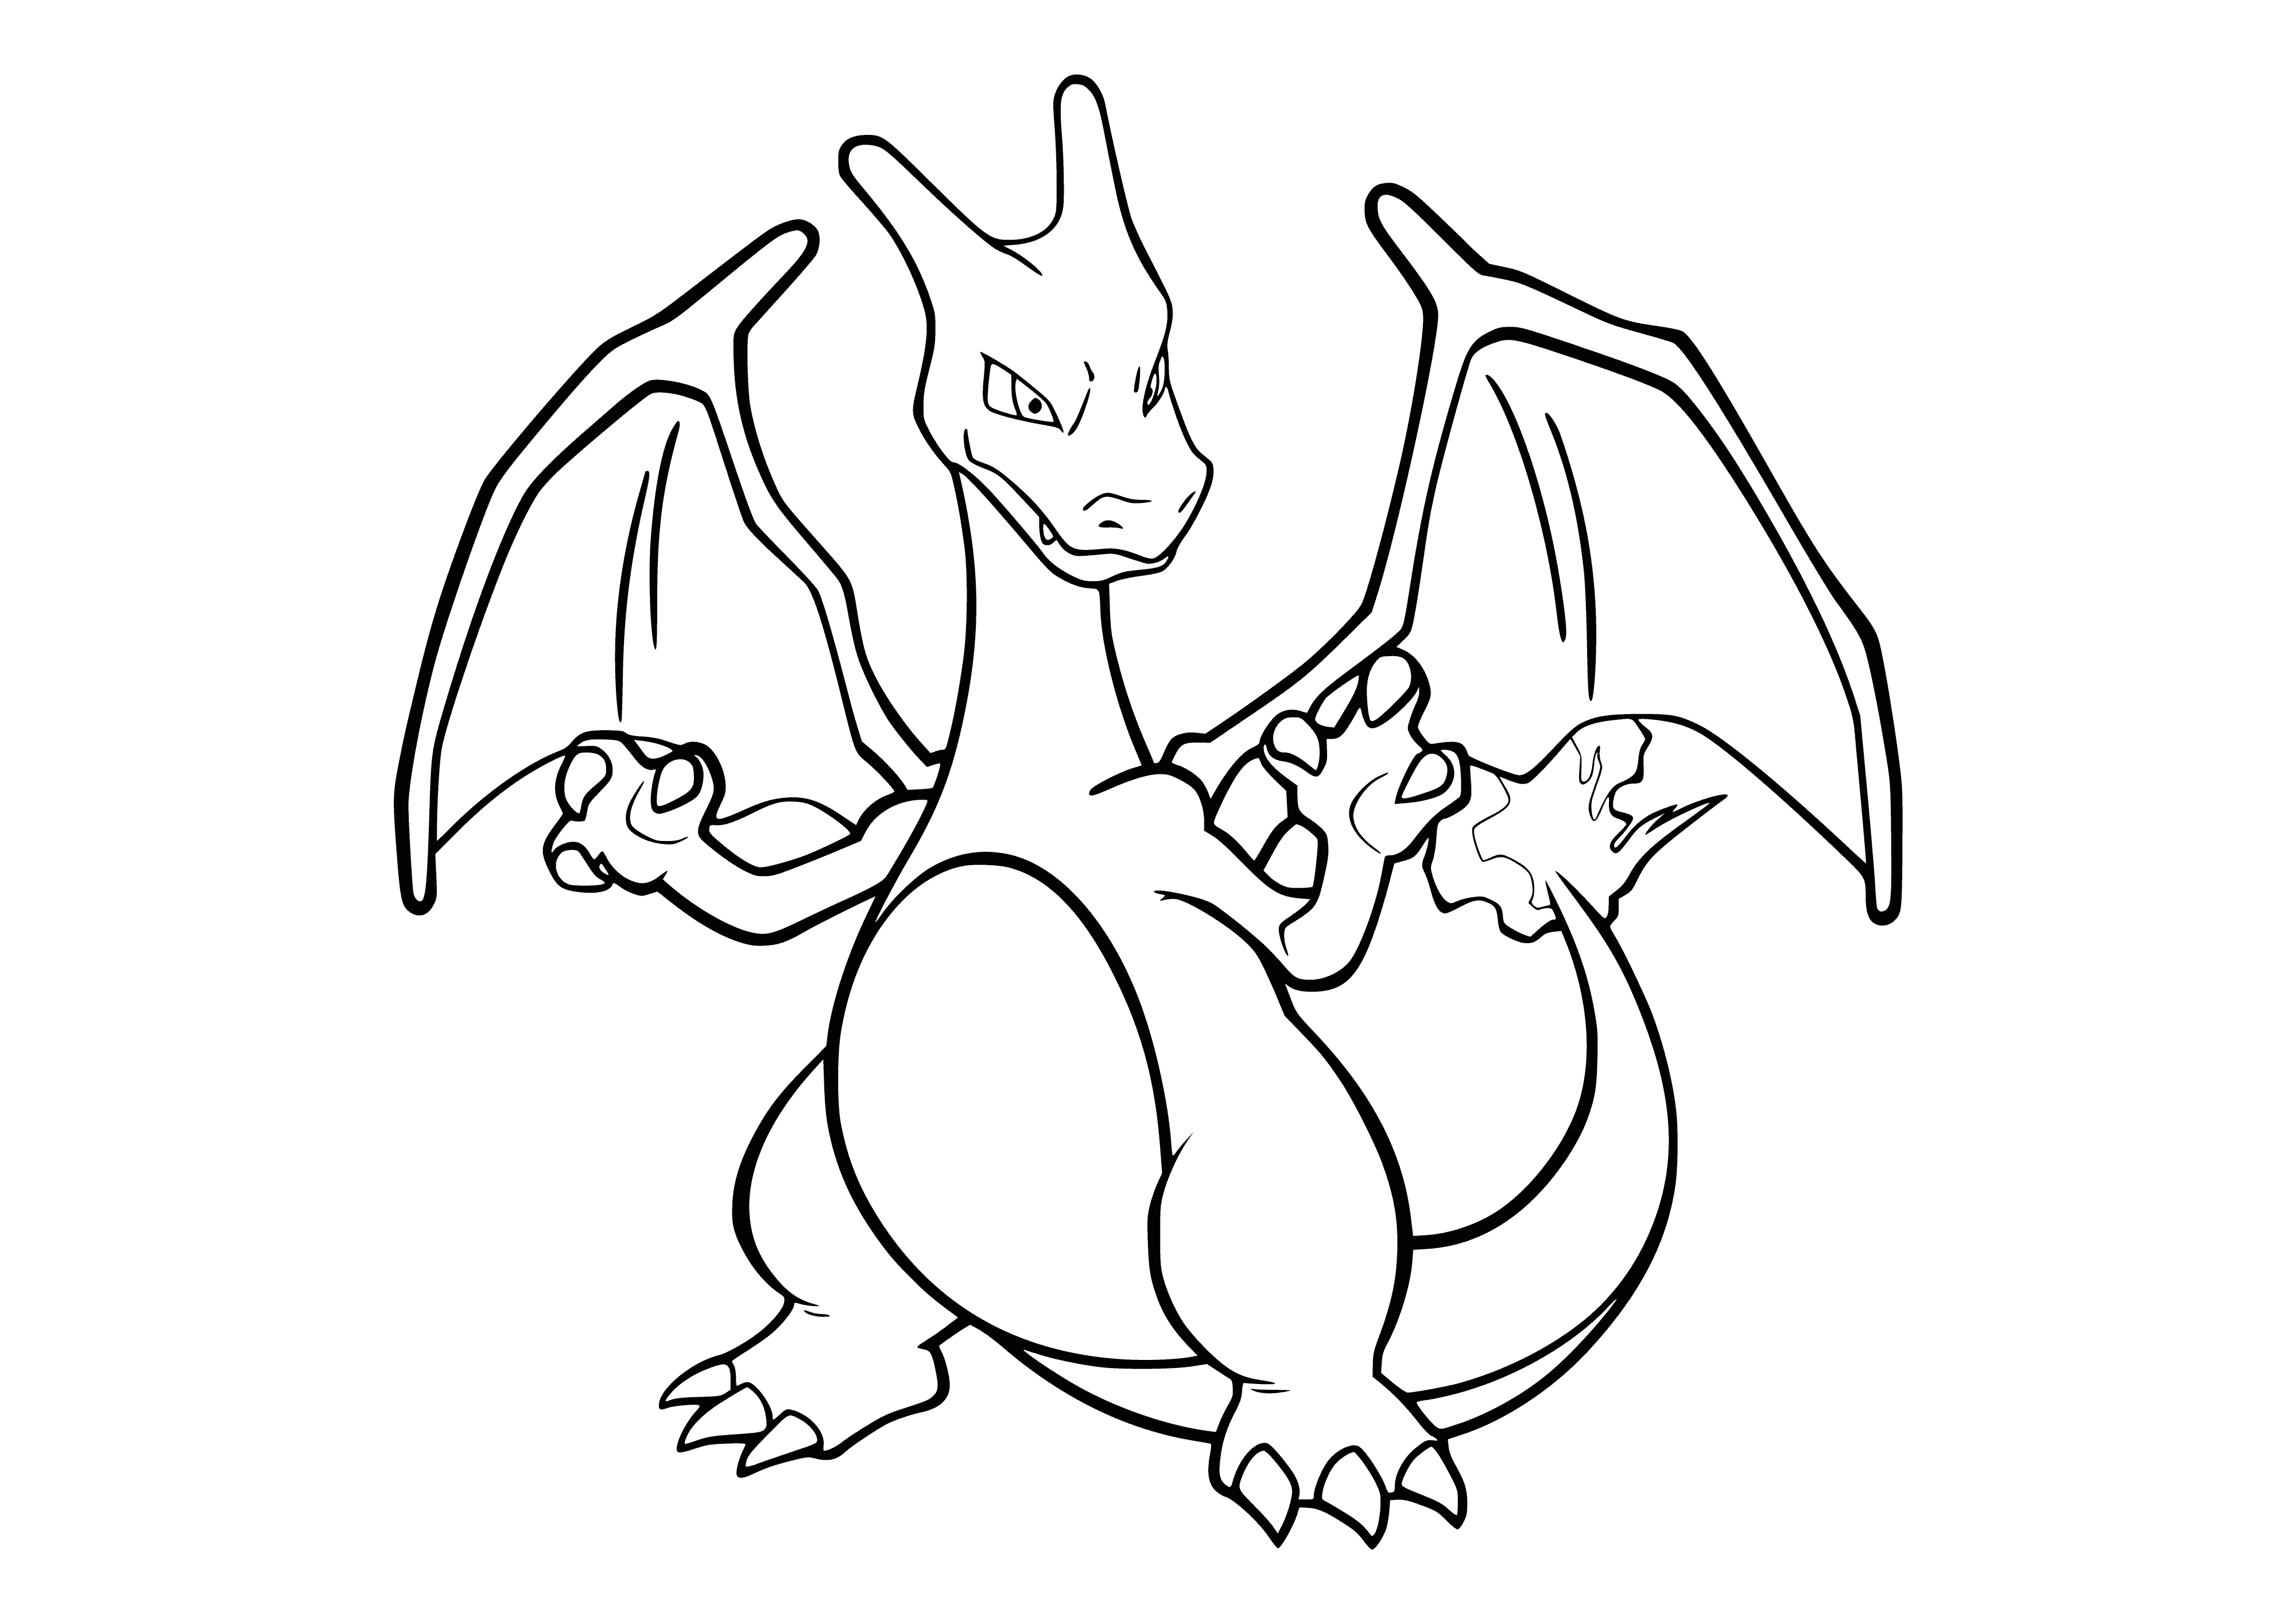 coloring page: Dedicated Charmander evolves into Charizard, possessing wings, orange scales, white belly, and fiery eyes.